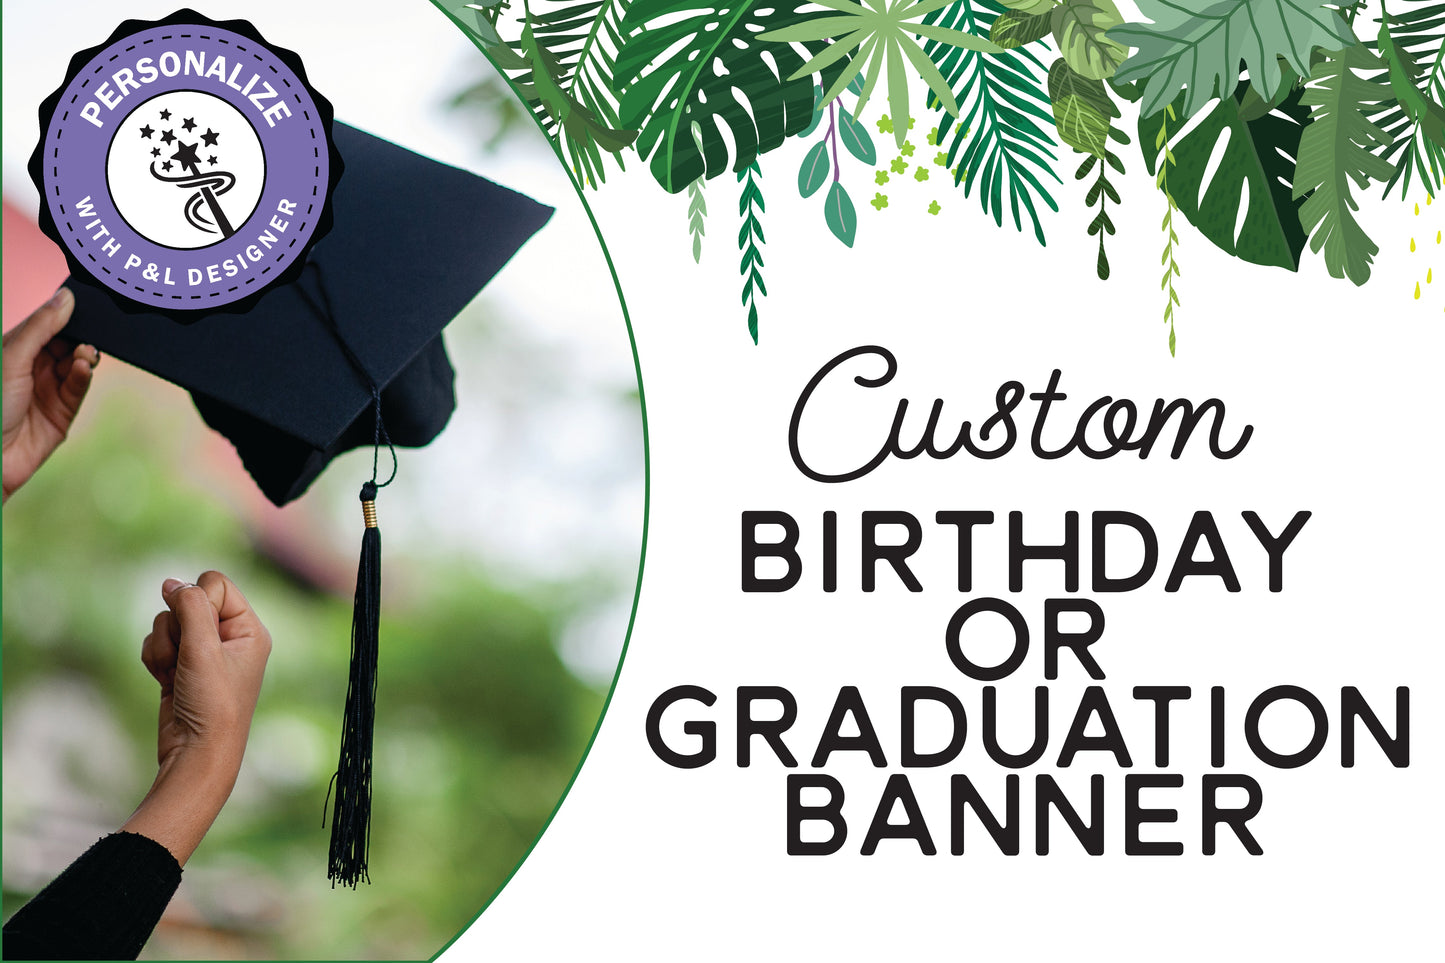 Custom Banner, 2x6 foot, customized for your special person